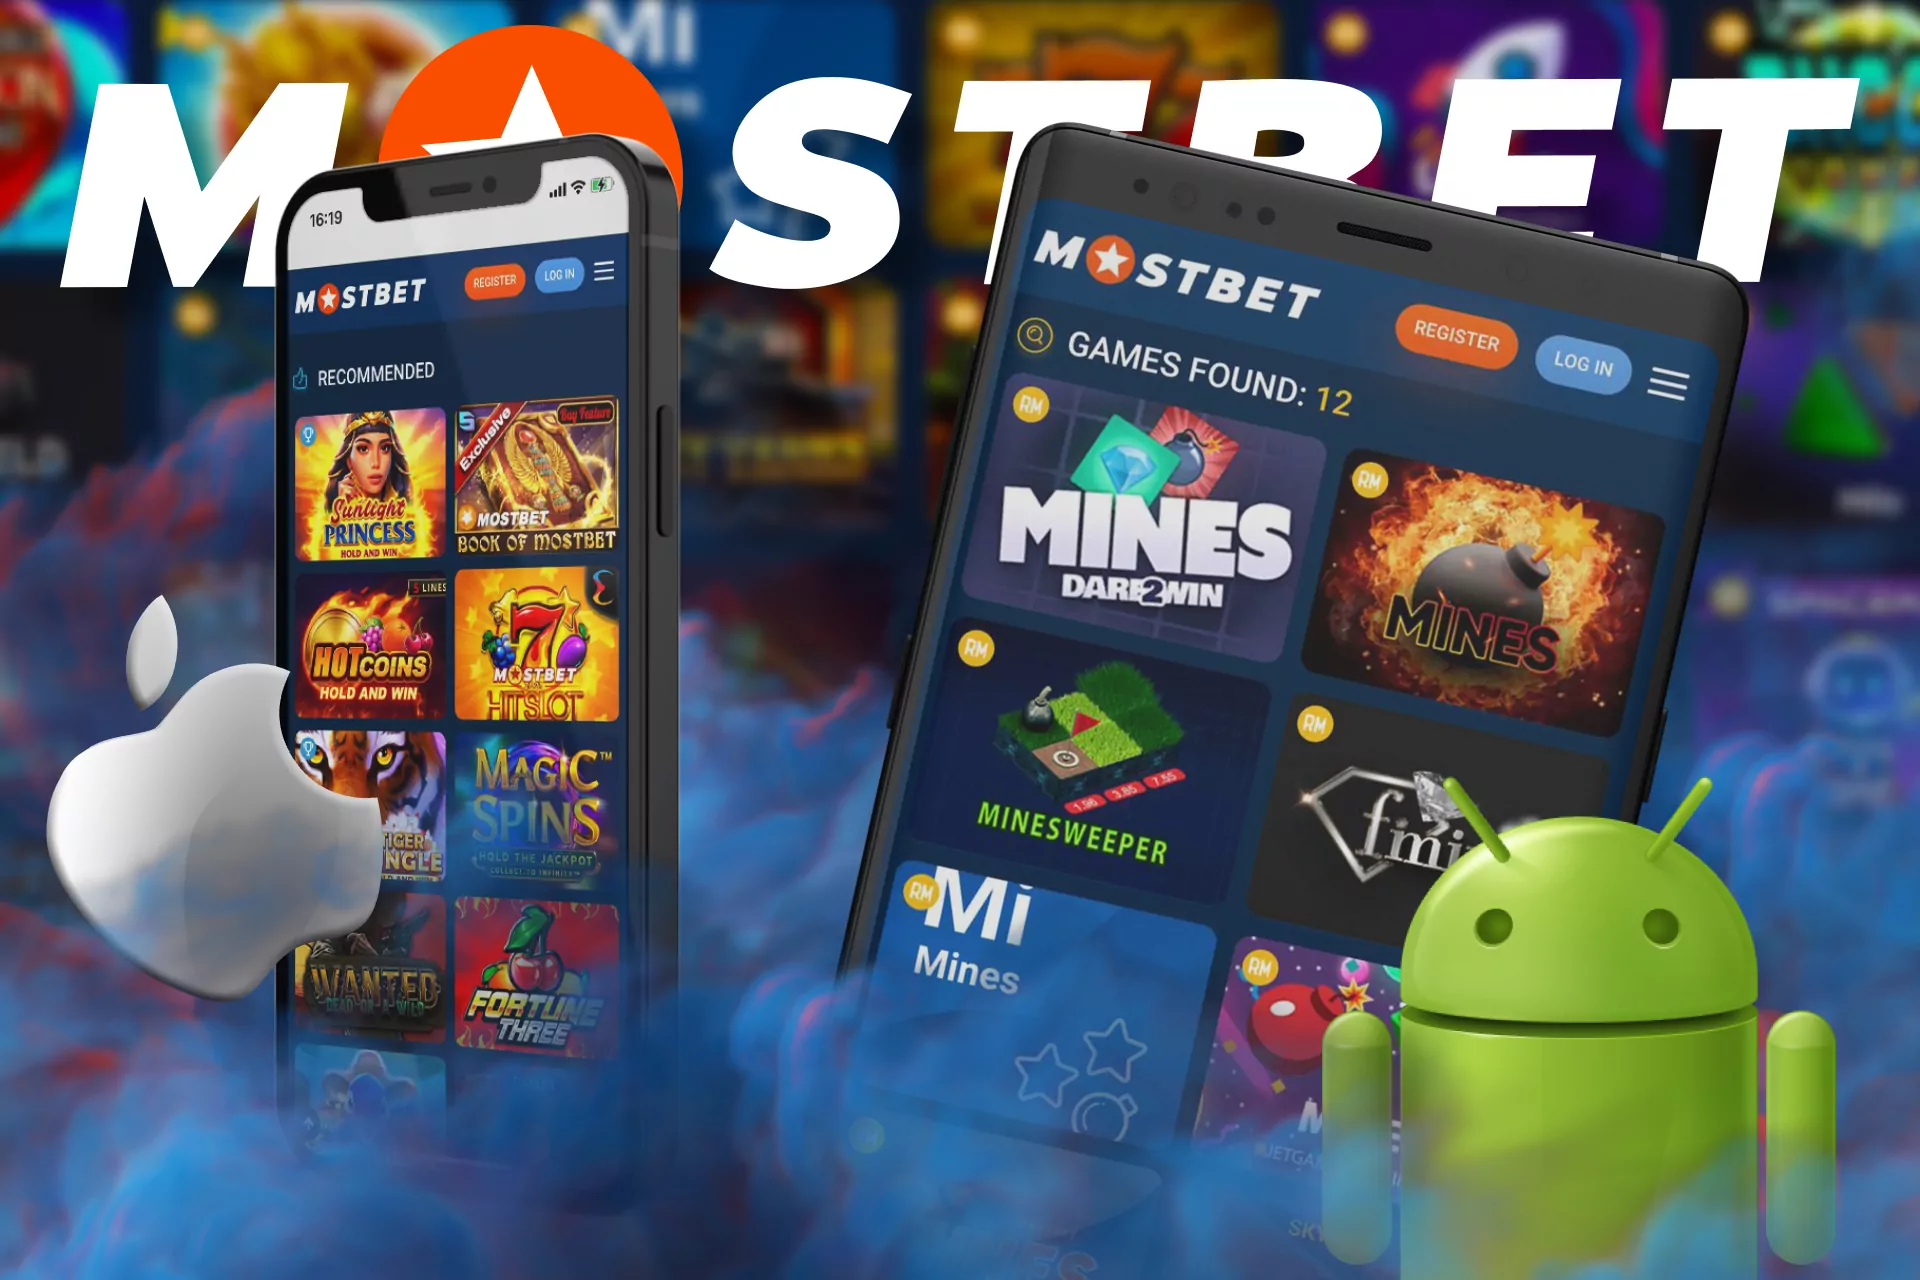 Play games with mines directly on your mobile device at Mostbet.